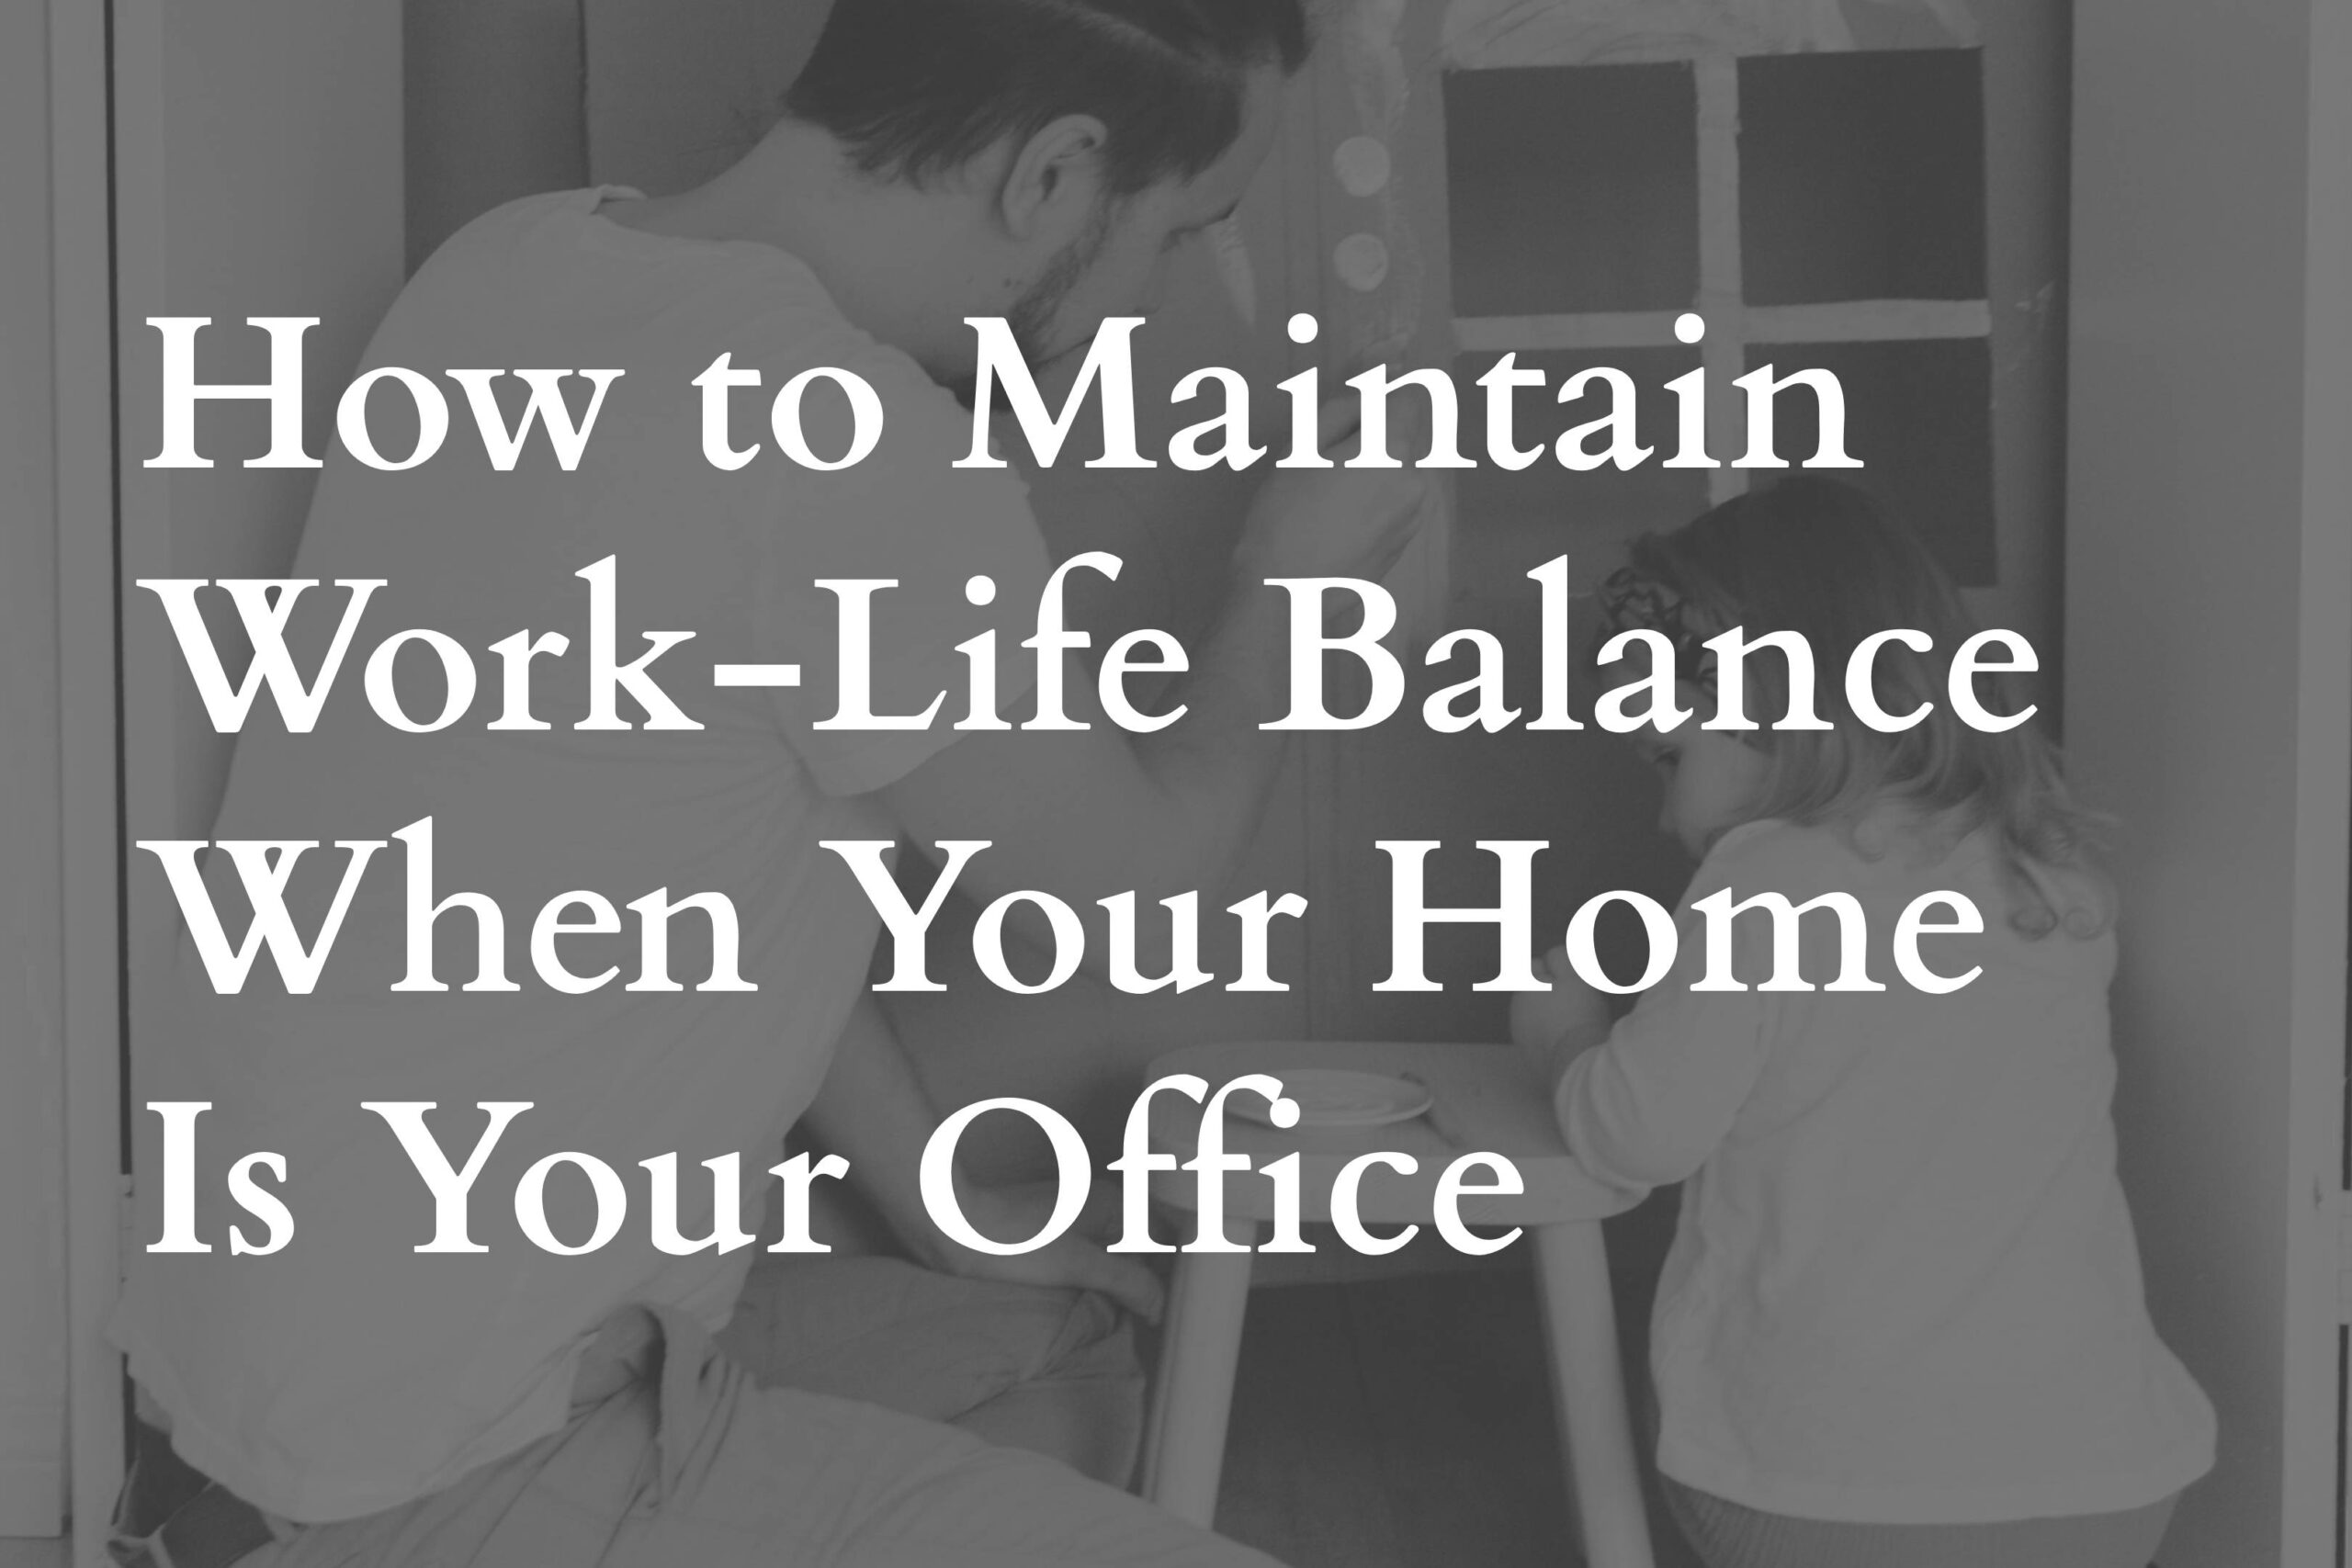 How to Maintain Work-Life Balance When Your Home is Your Office